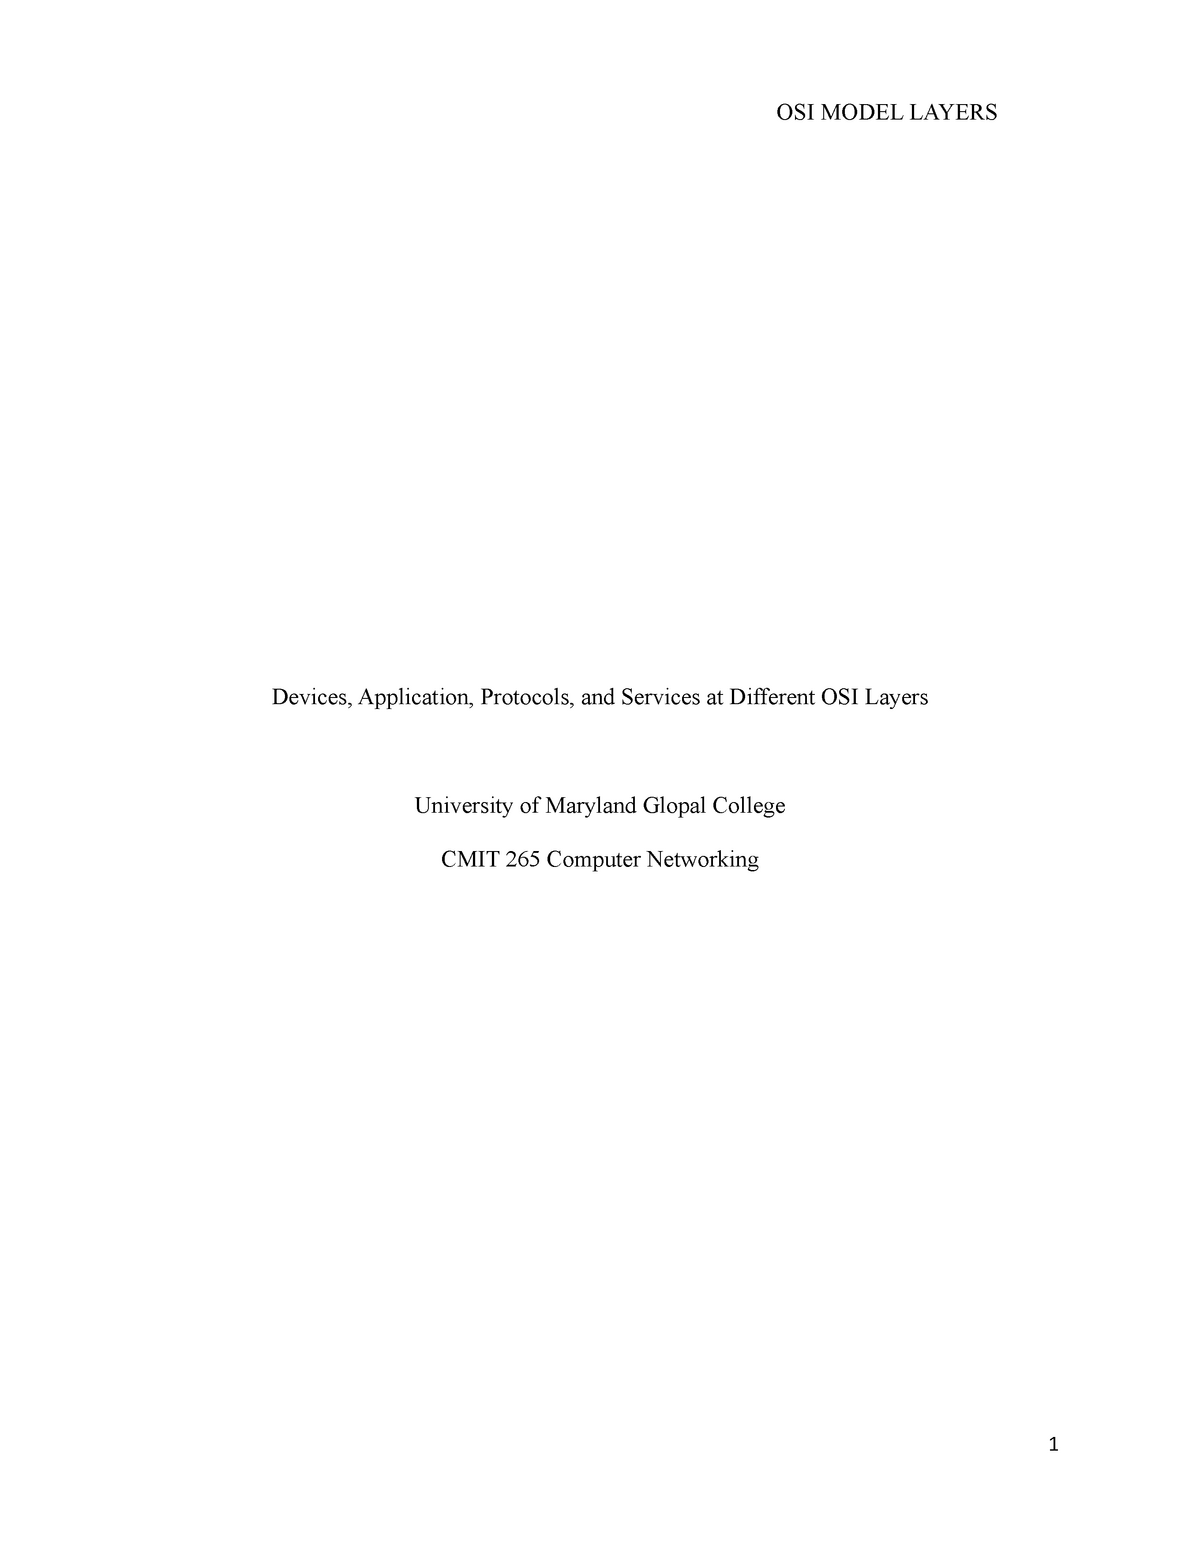 research paper for networking